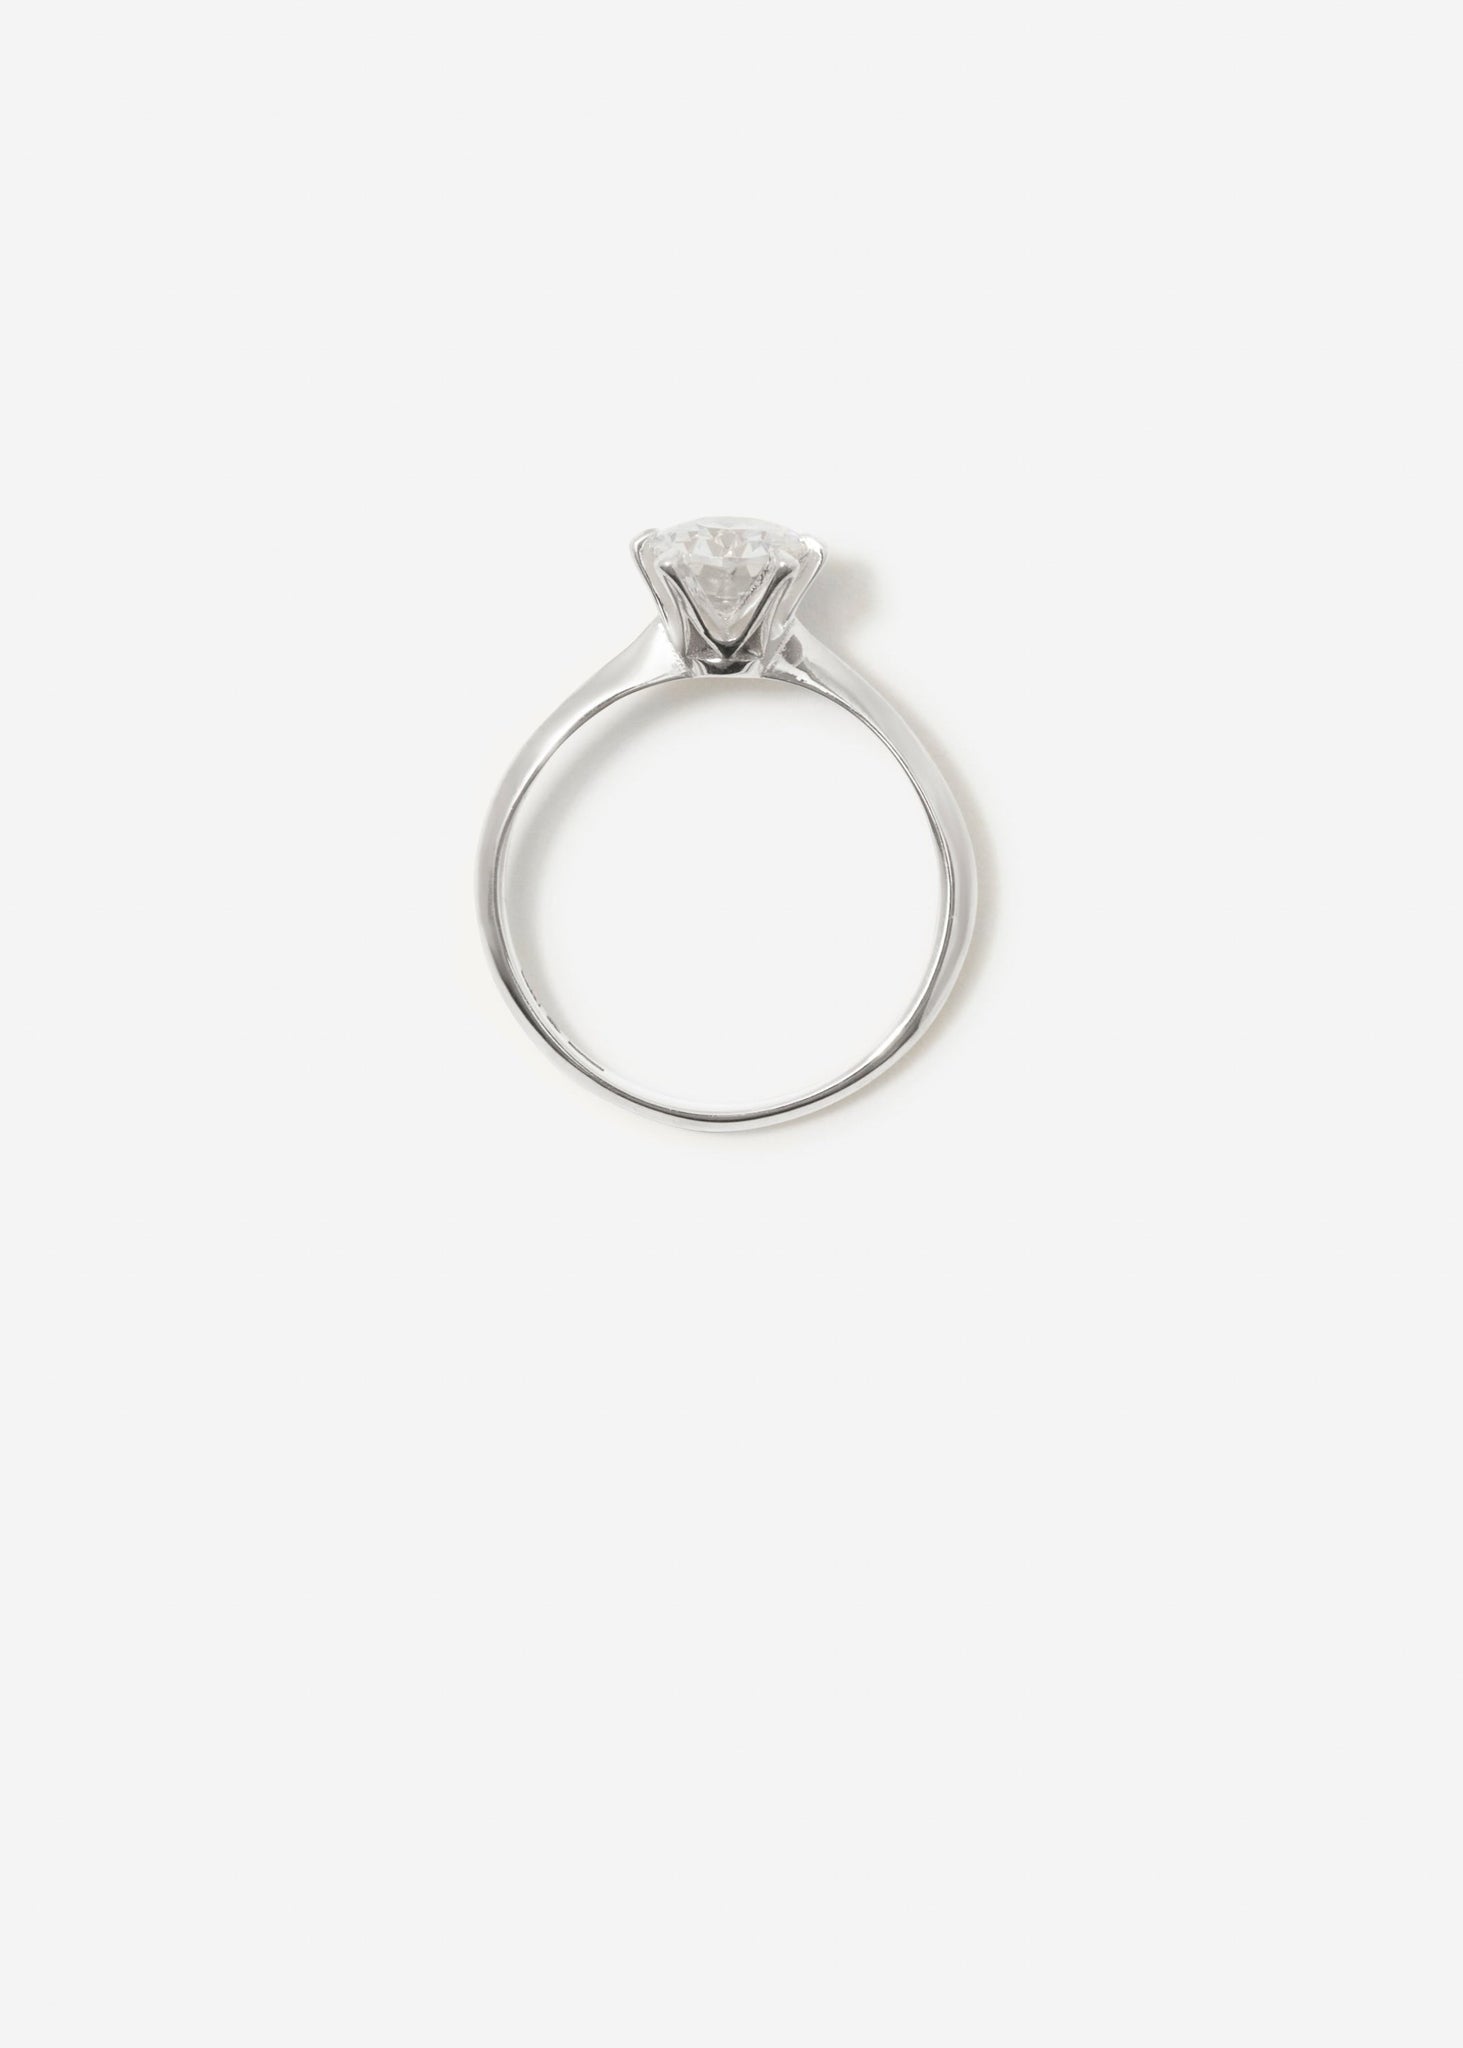 Oval Solitaire Ring Maxi 0.7 - 0.9 Ct - Rings - Customised - 2